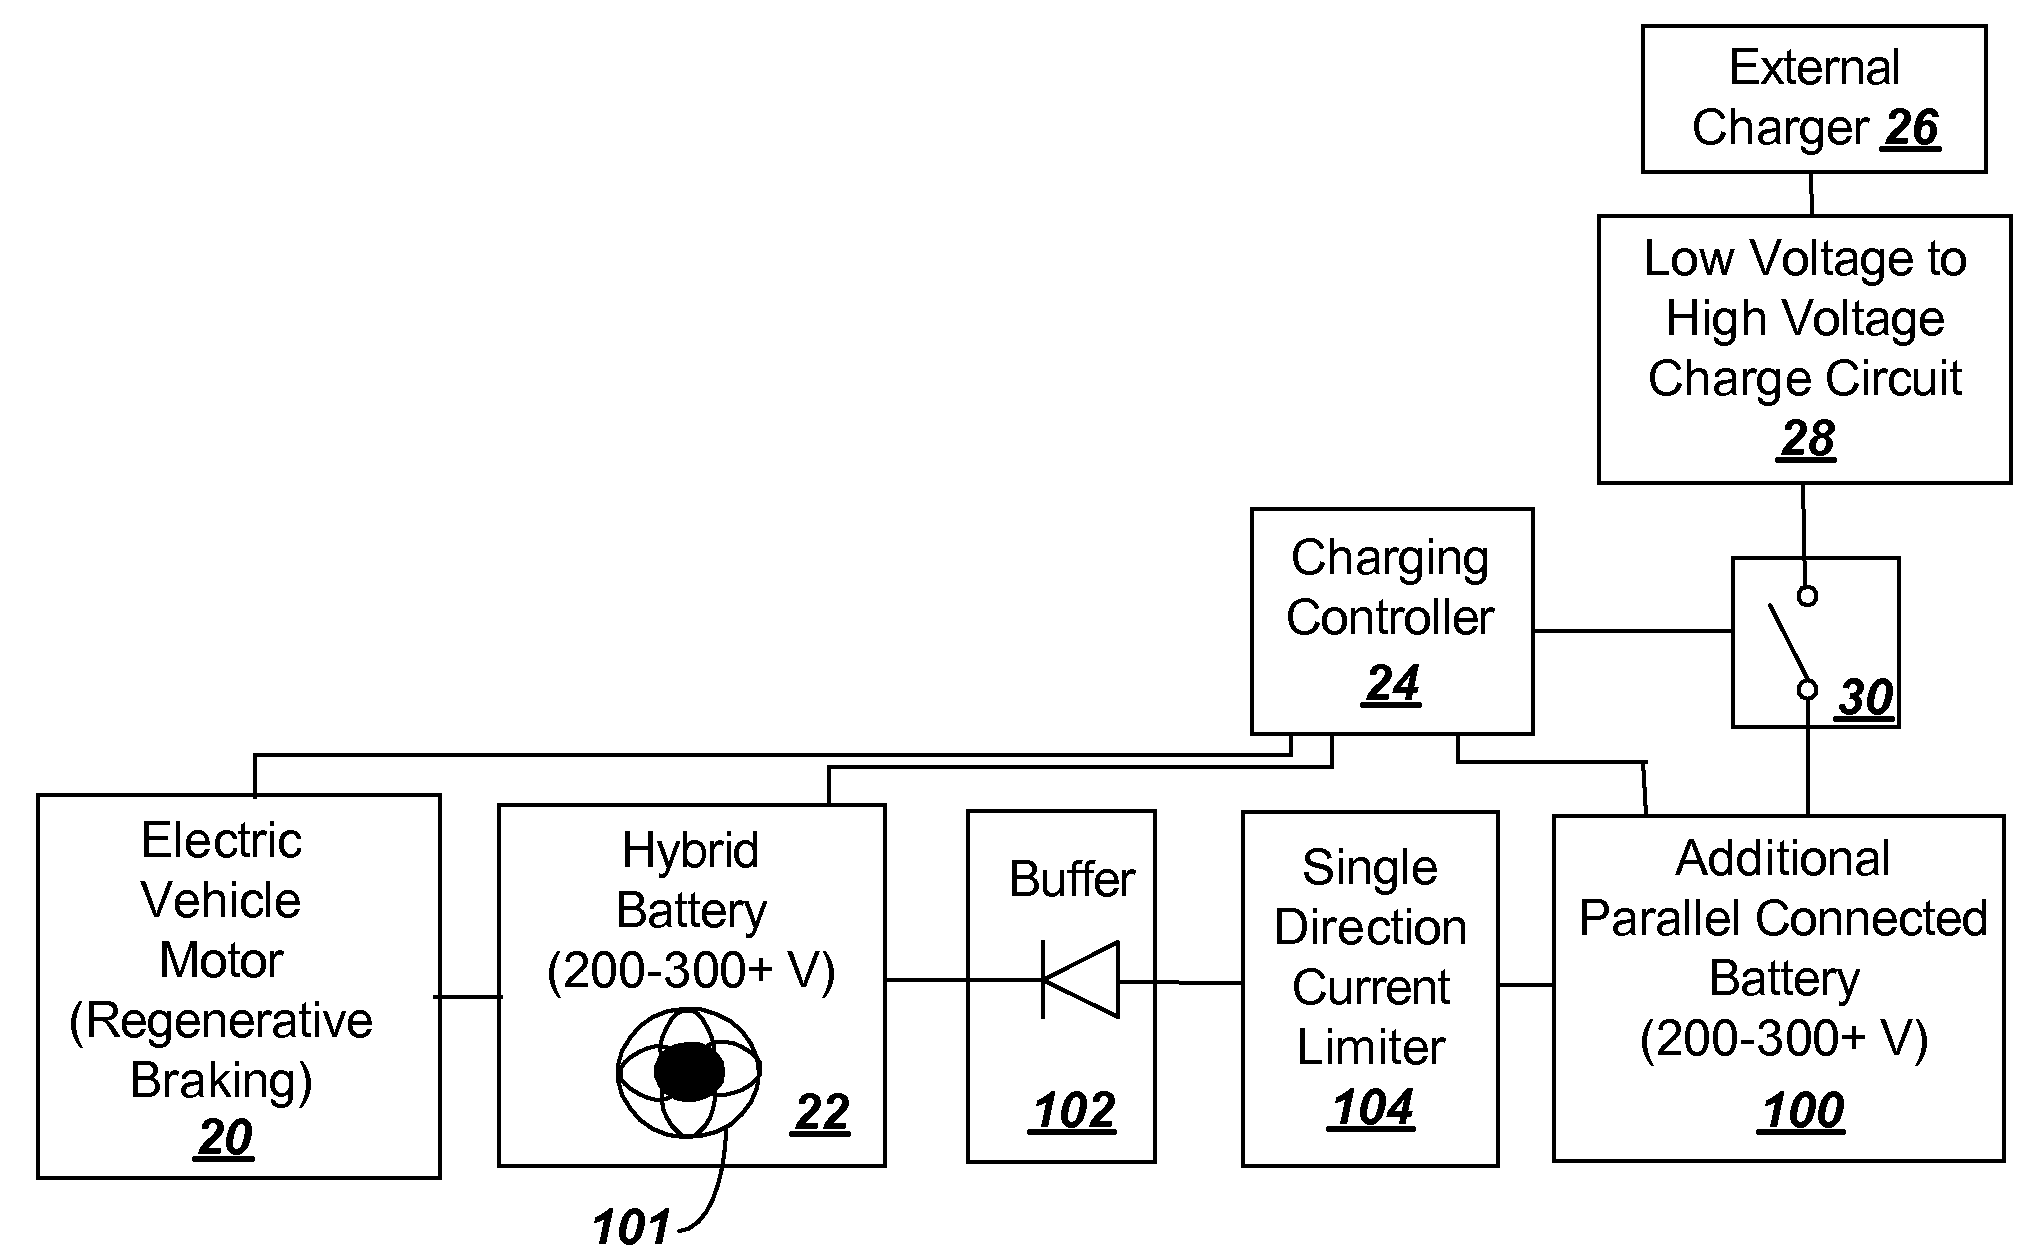 Current limiting parallel battery charging system to enable plug-in or solar power to supplement regenerative braking in hybrid or electric vehicle